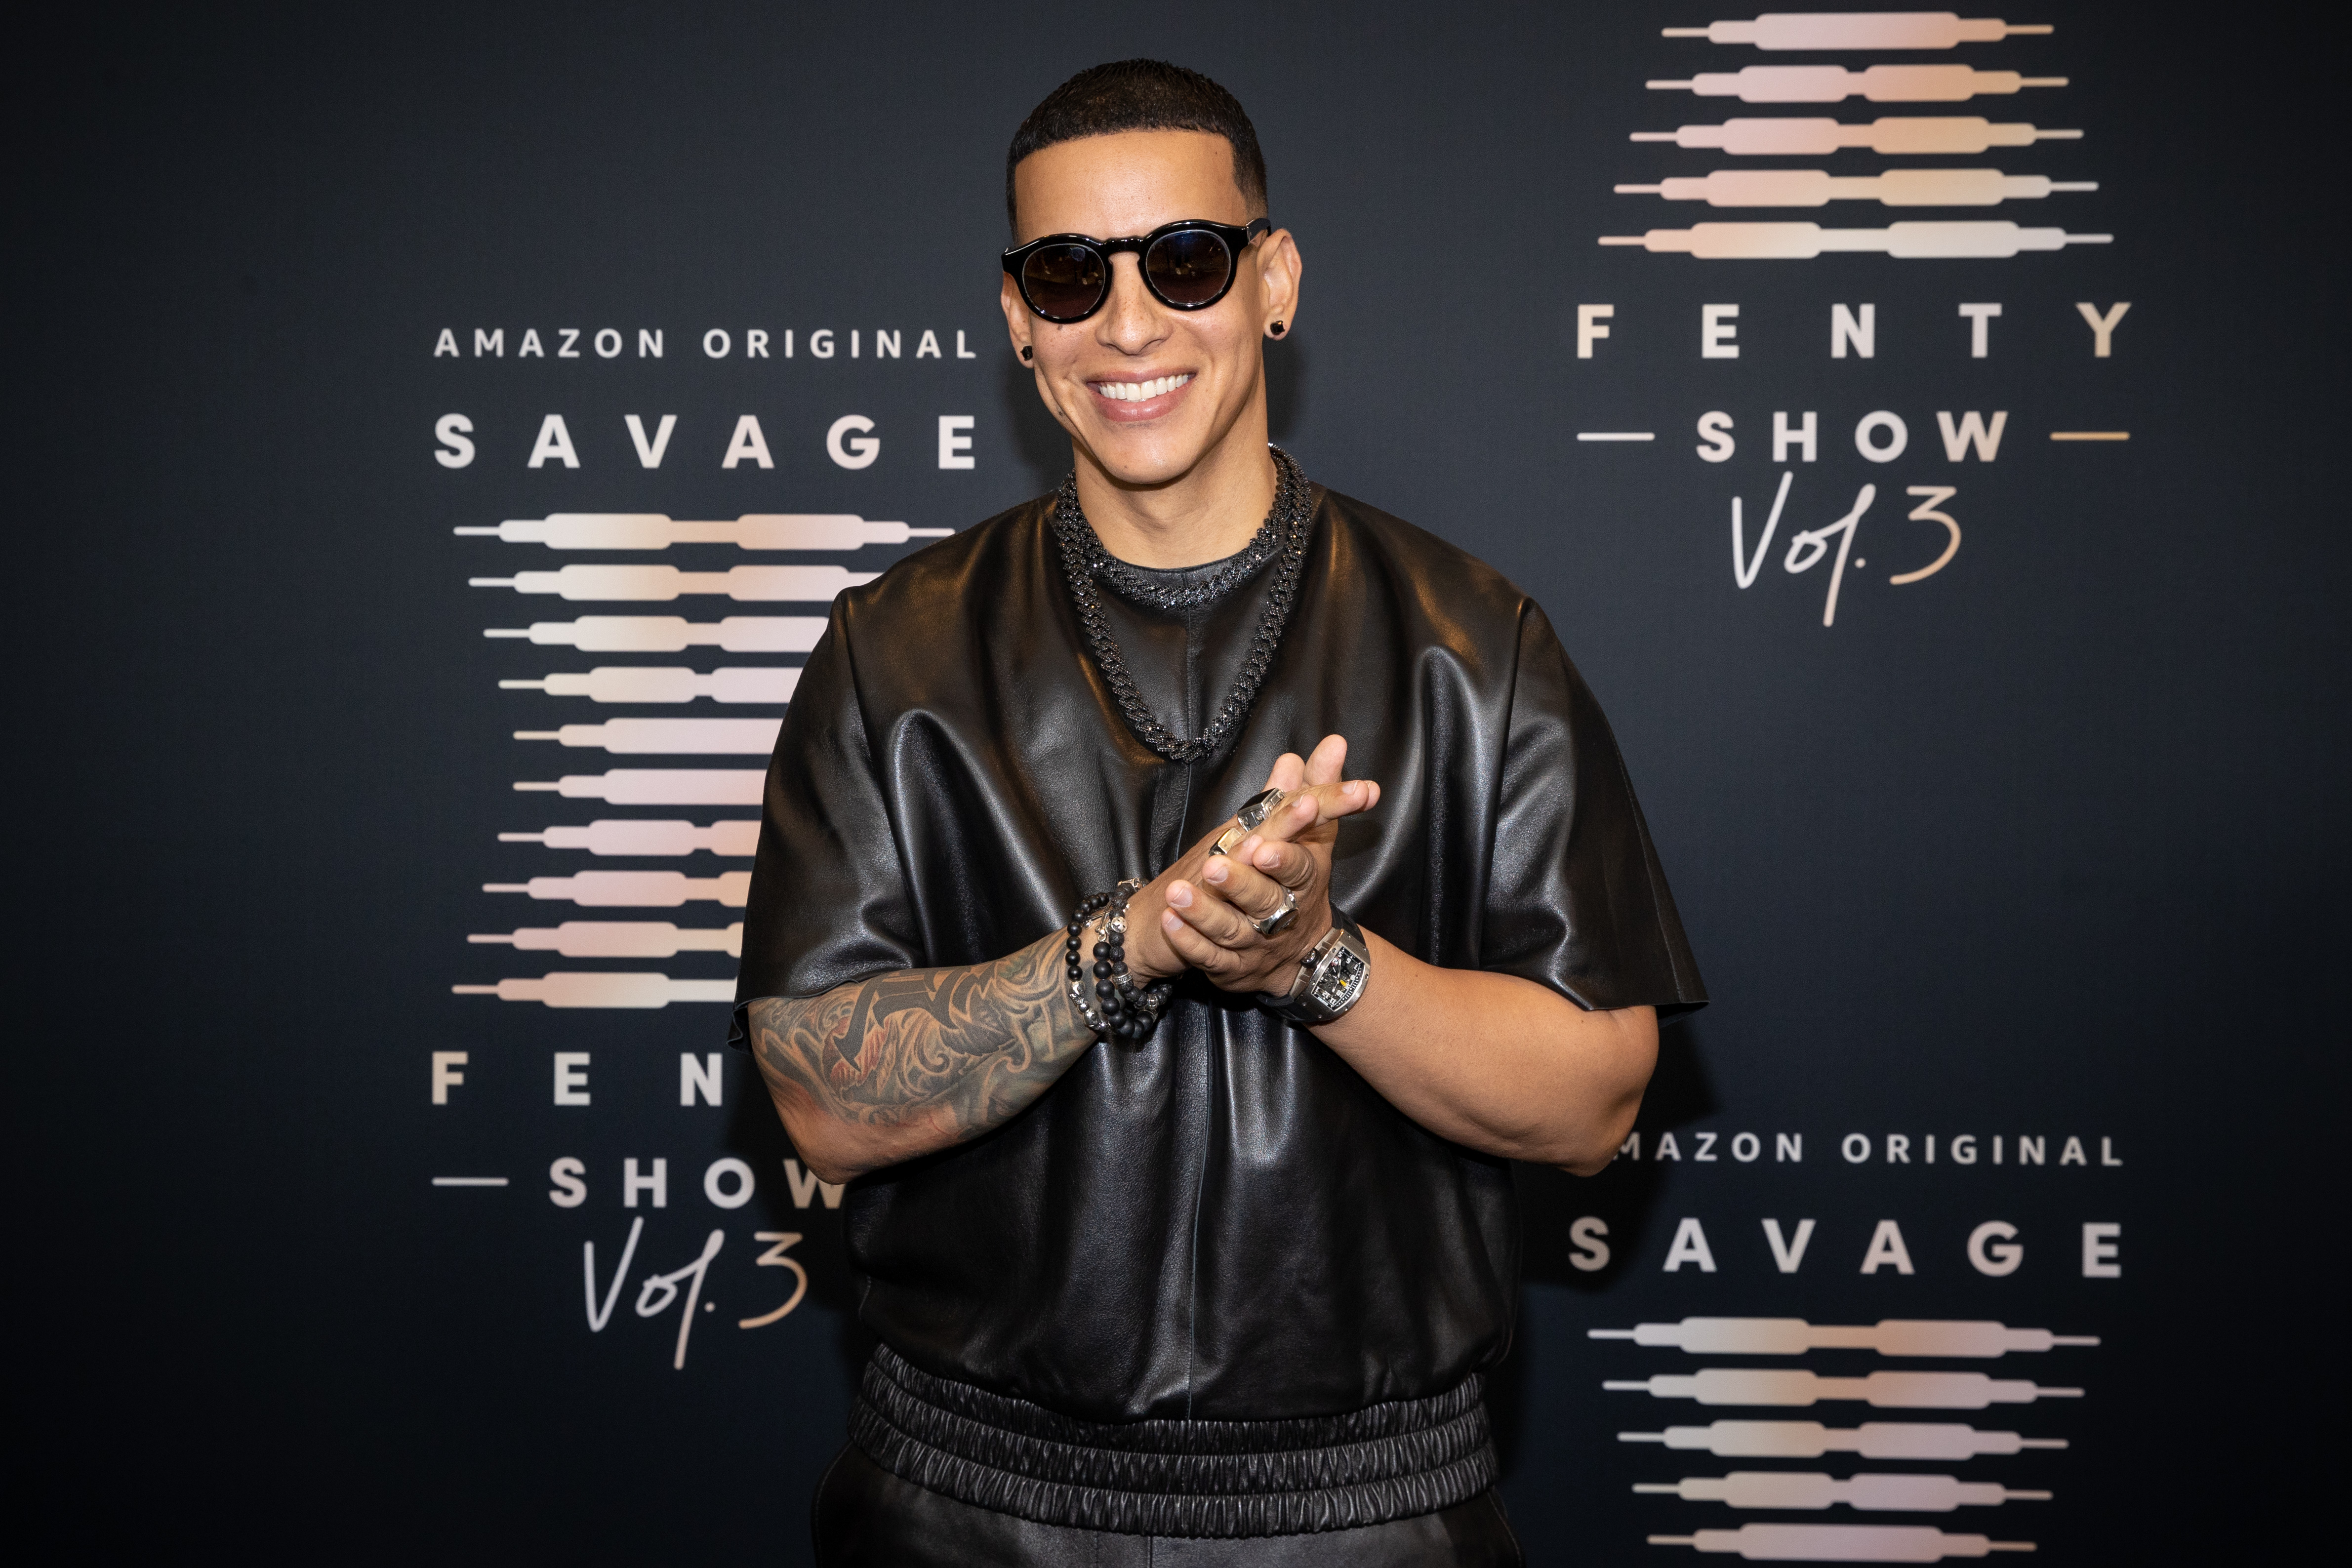 Daddy Yankee Announces Retirement With Farewell Tour and Album